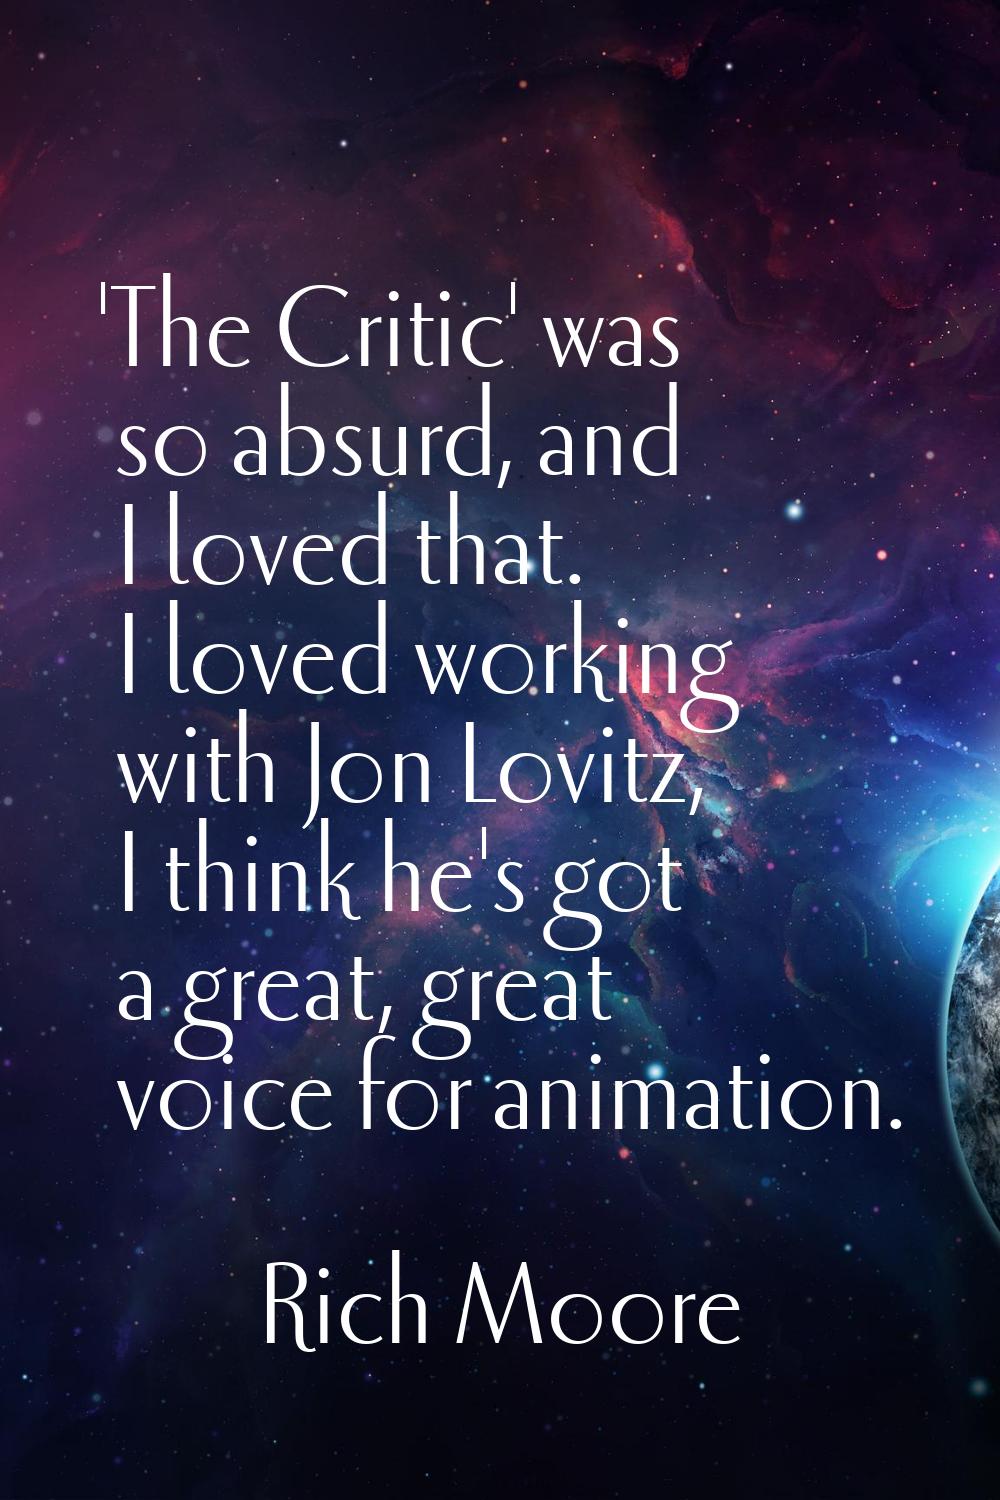 'The Critic' was so absurd, and I loved that. I loved working with Jon Lovitz, I think he's got a g